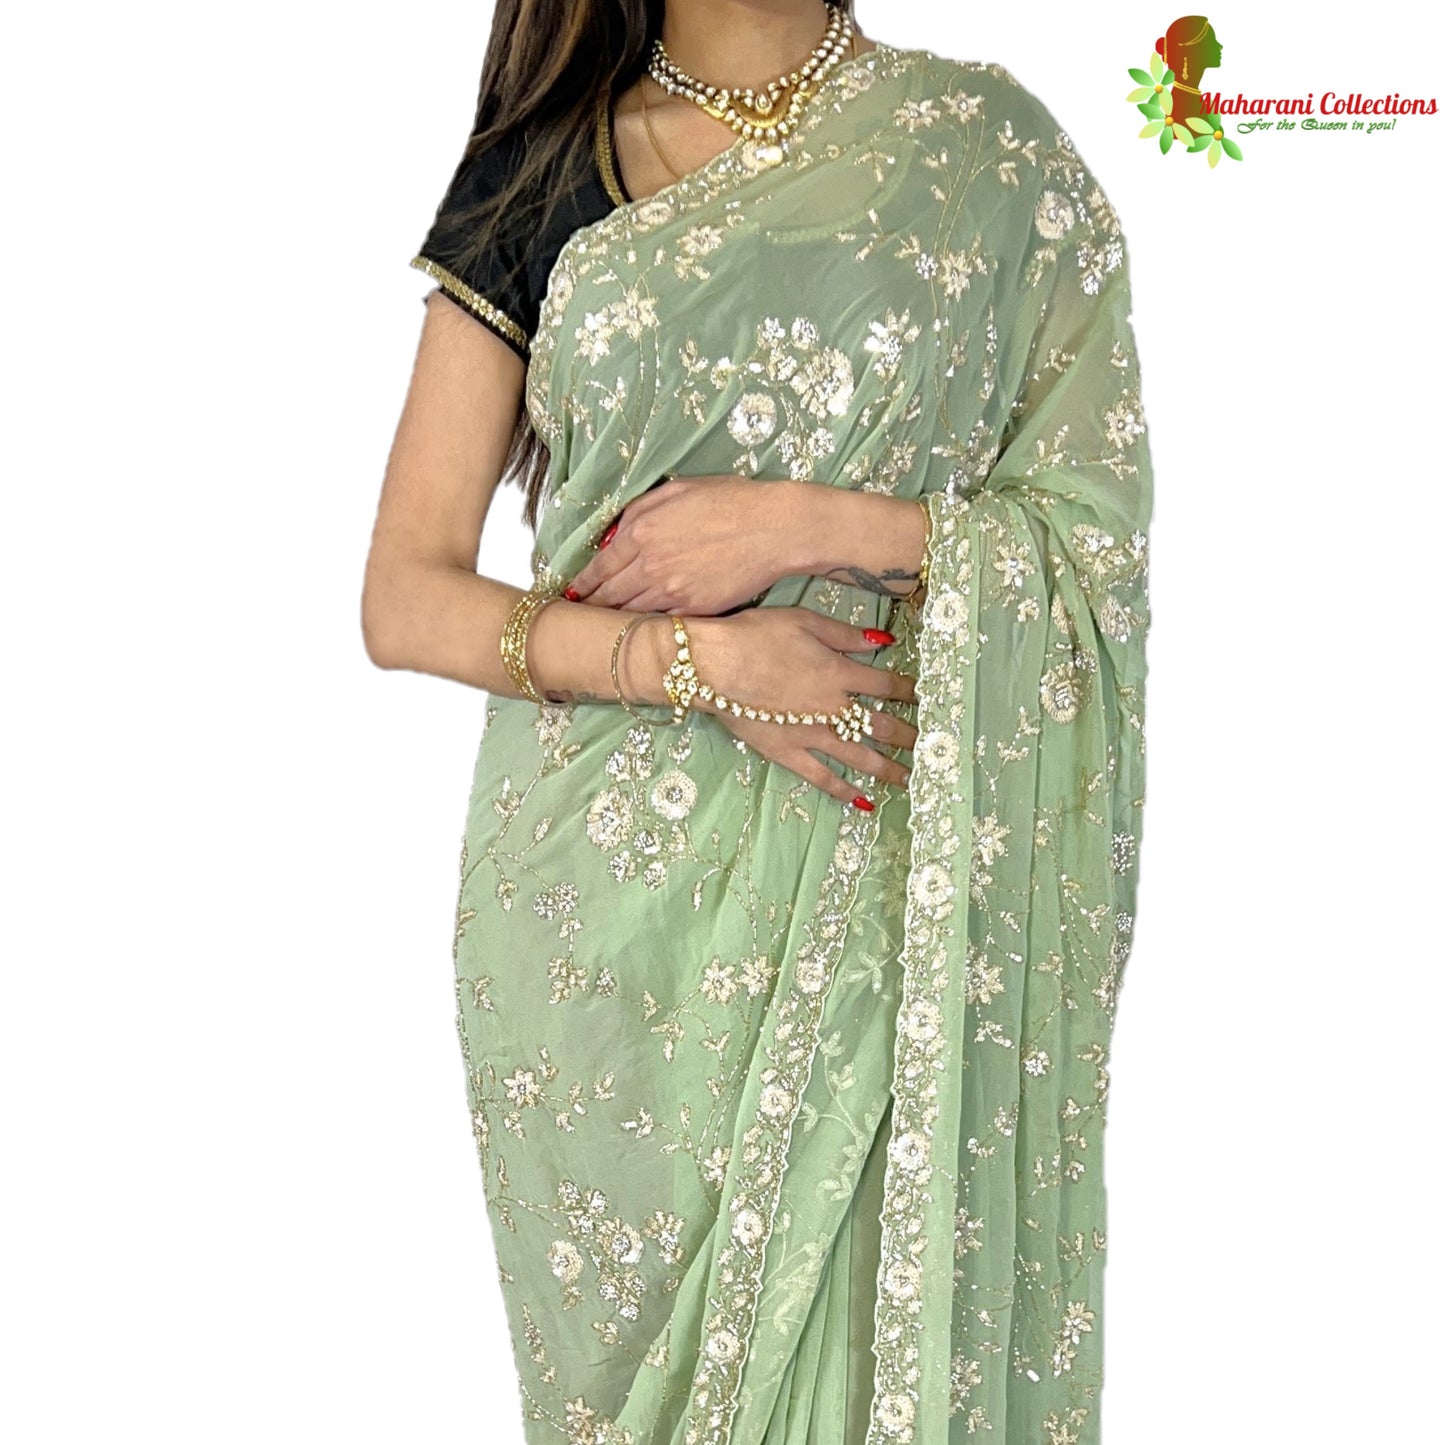 Maharani's Party Wear Georgette Heavy Work Saree - Sea Green (with Stitched Petticoat)